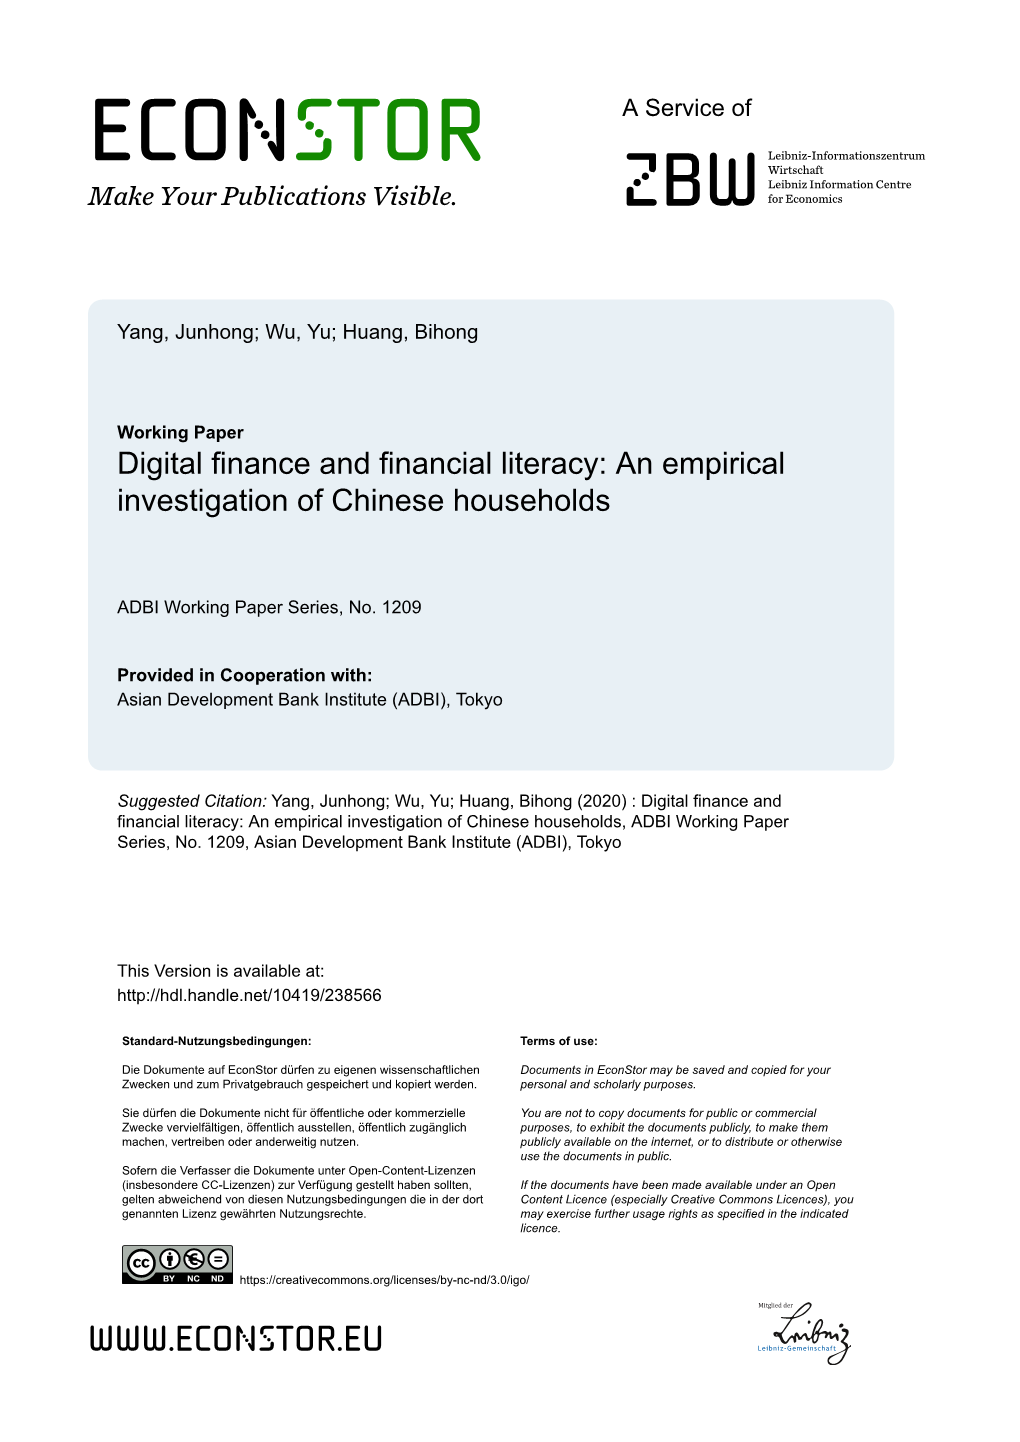 Digital Finance and Financial Literacy: an Empirical Investigation of Chinese Households